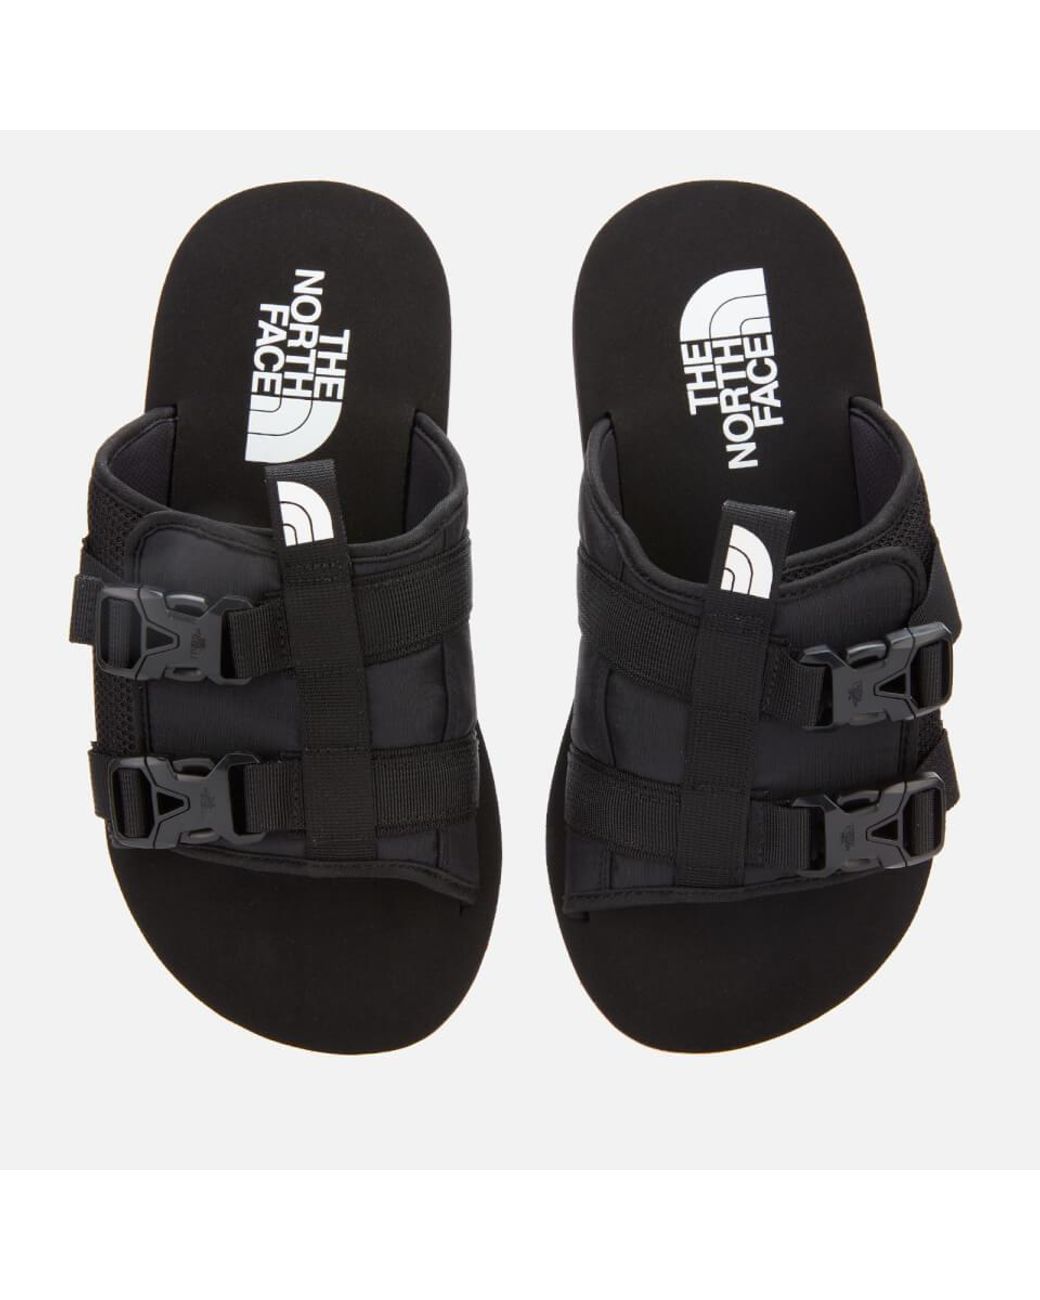 pink north face sliders